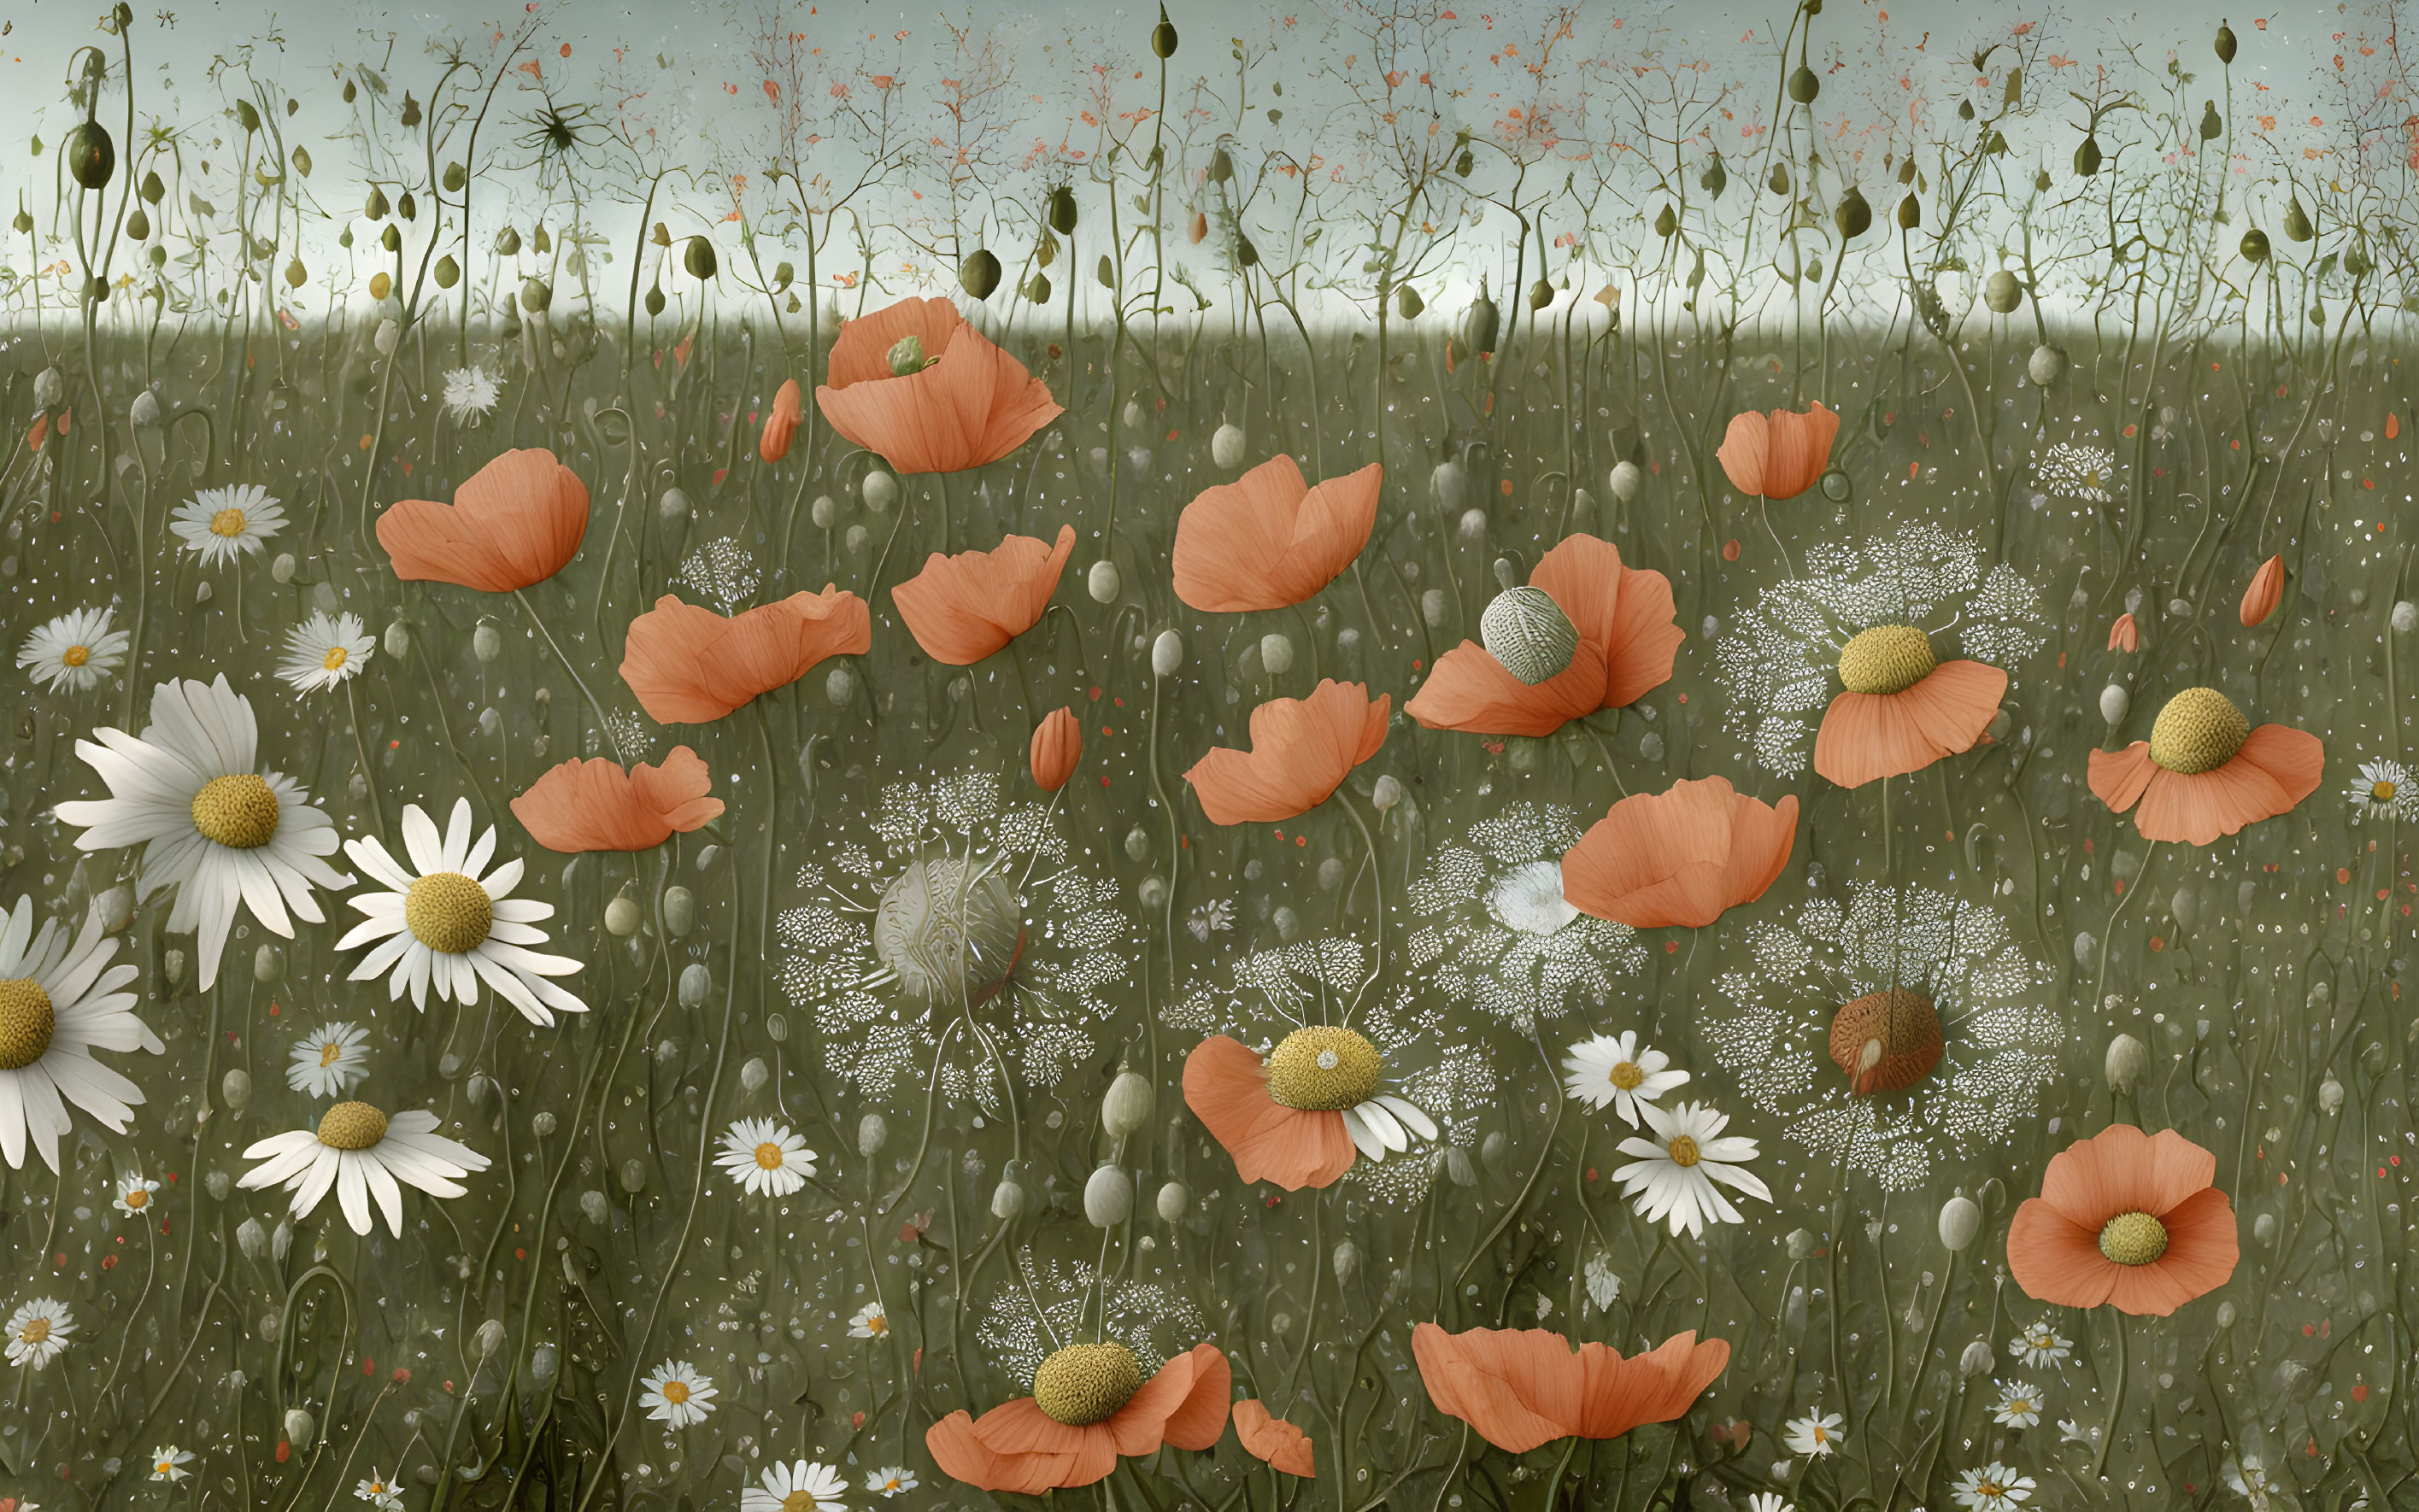 Tranquil field with red poppies, white daisies, and greenery under cloudy sky